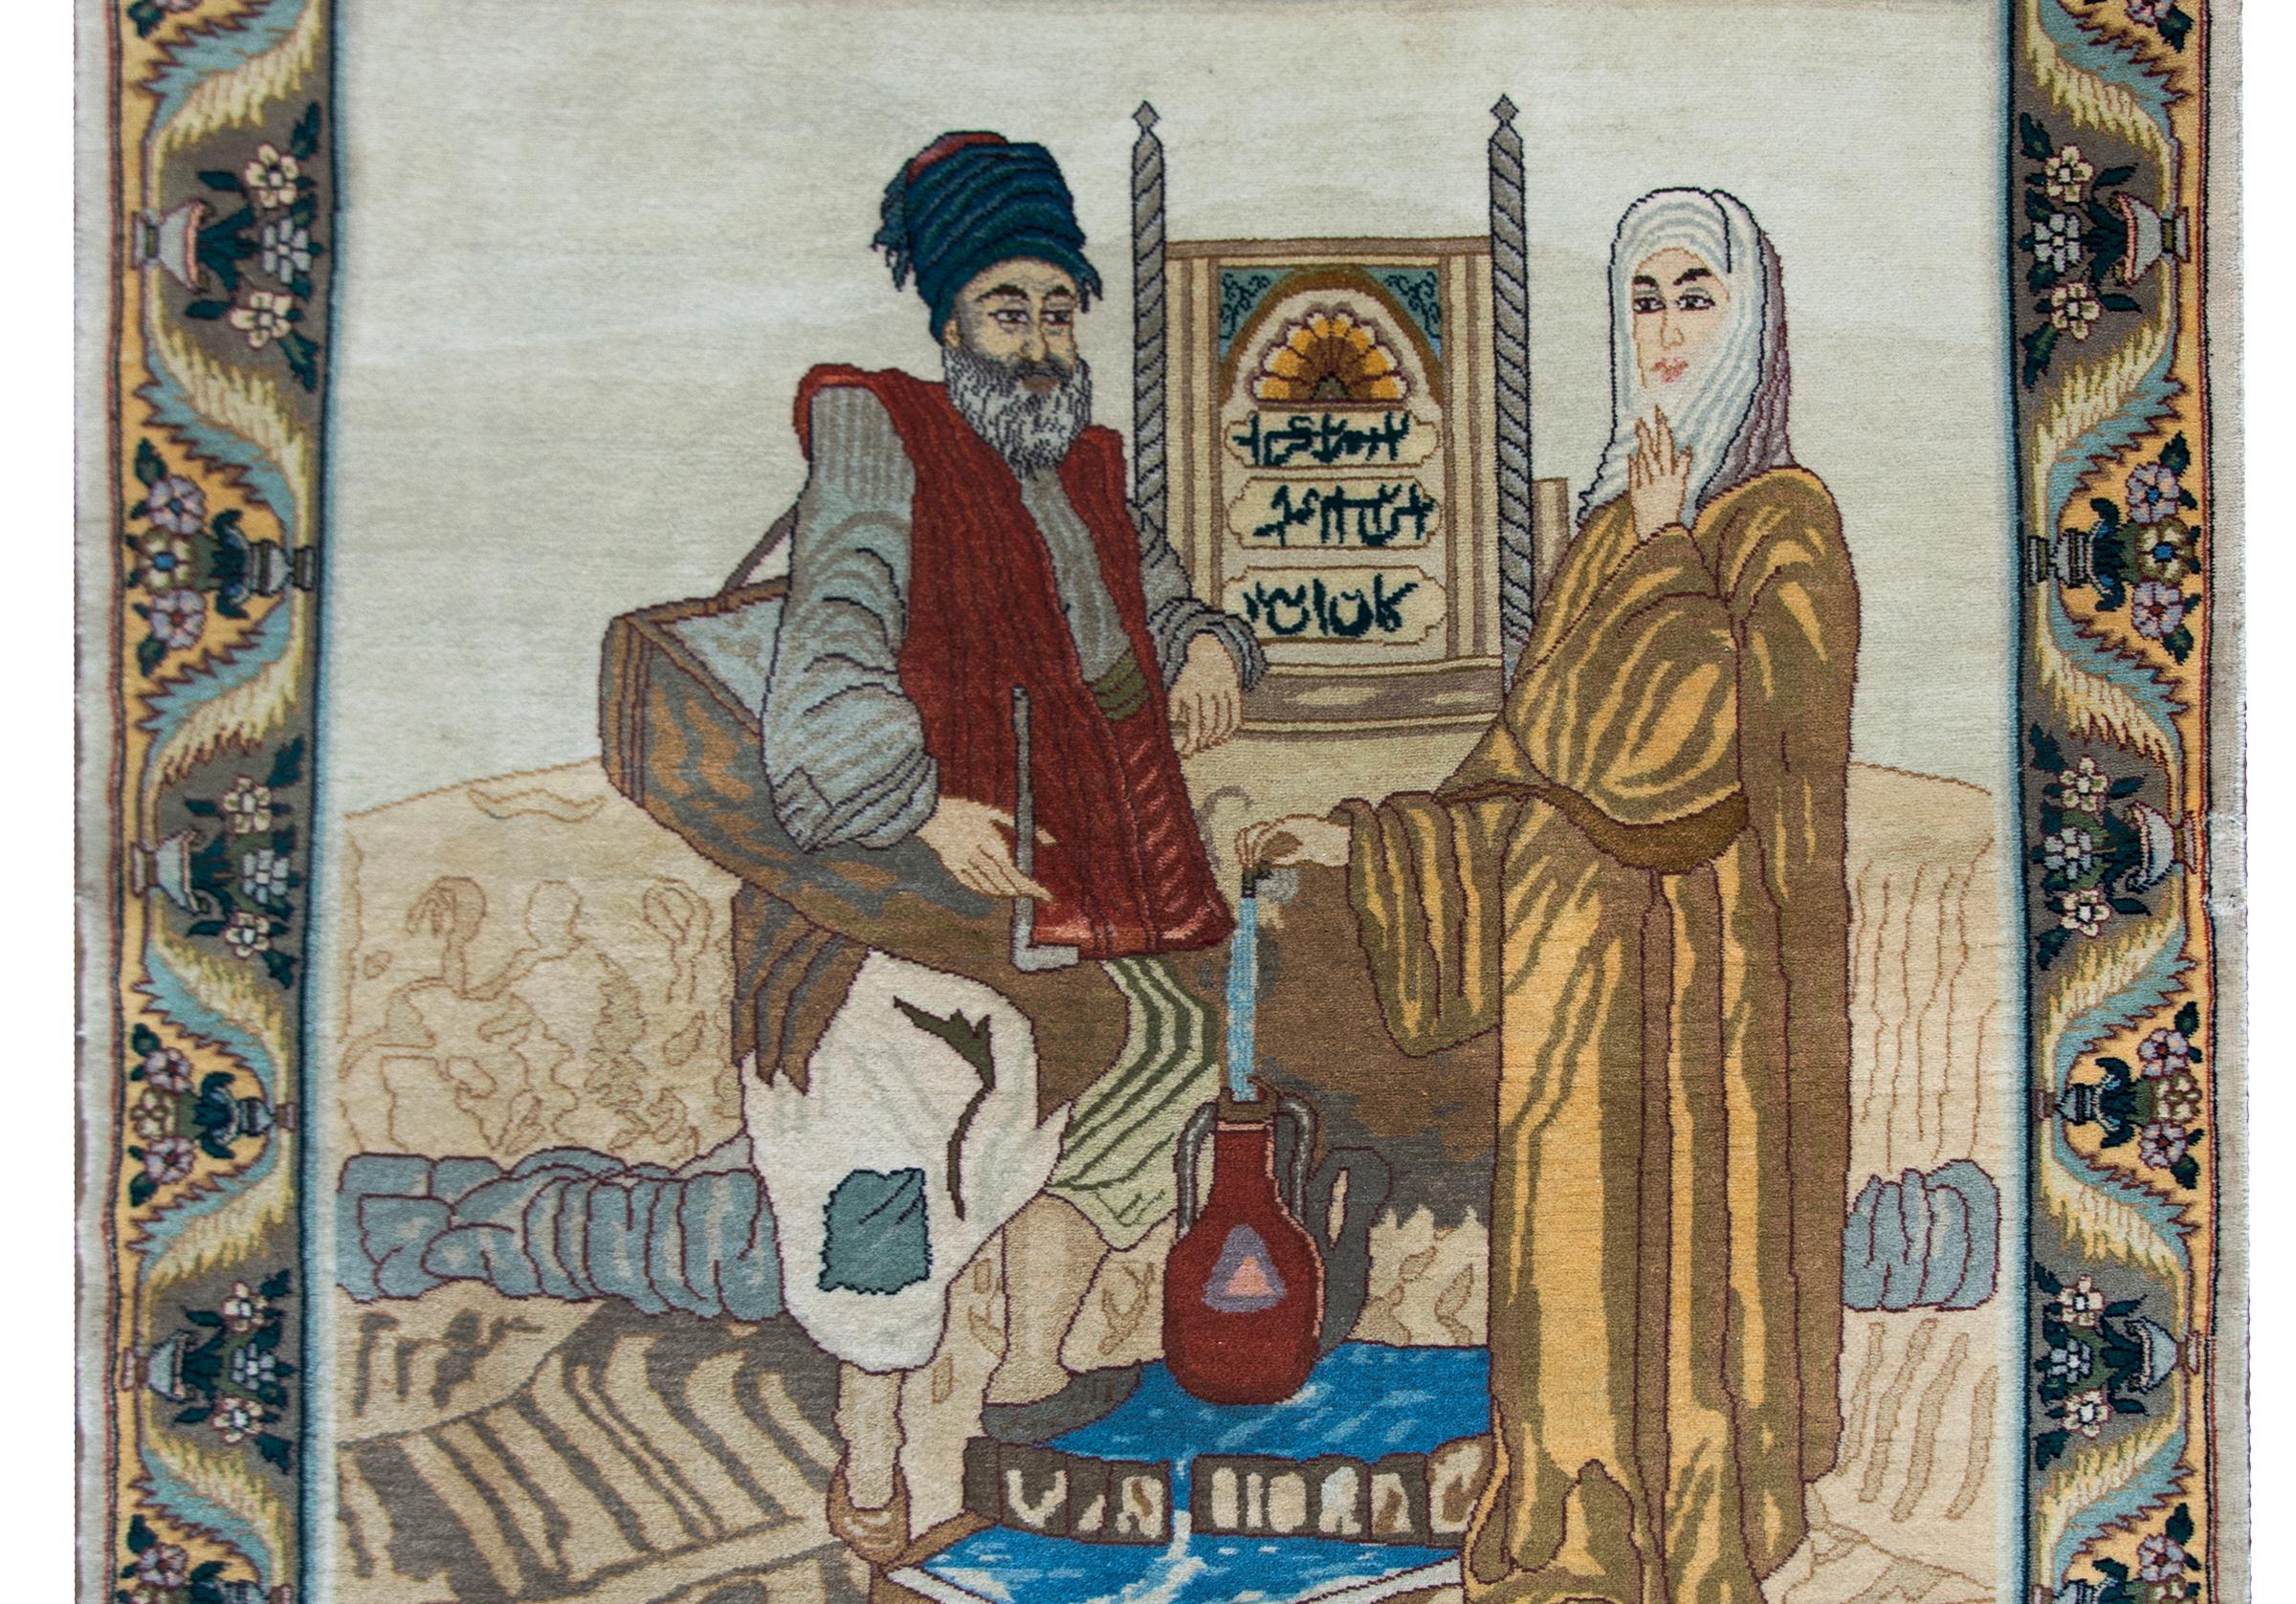 A beautiful late 20th century Persian Tabriz pictorial rug depicting a man and woman standing near a fountain and filling a pitcher of water, and all woven in beautiful crimson, gold, blue and various browns and beige colored wools.